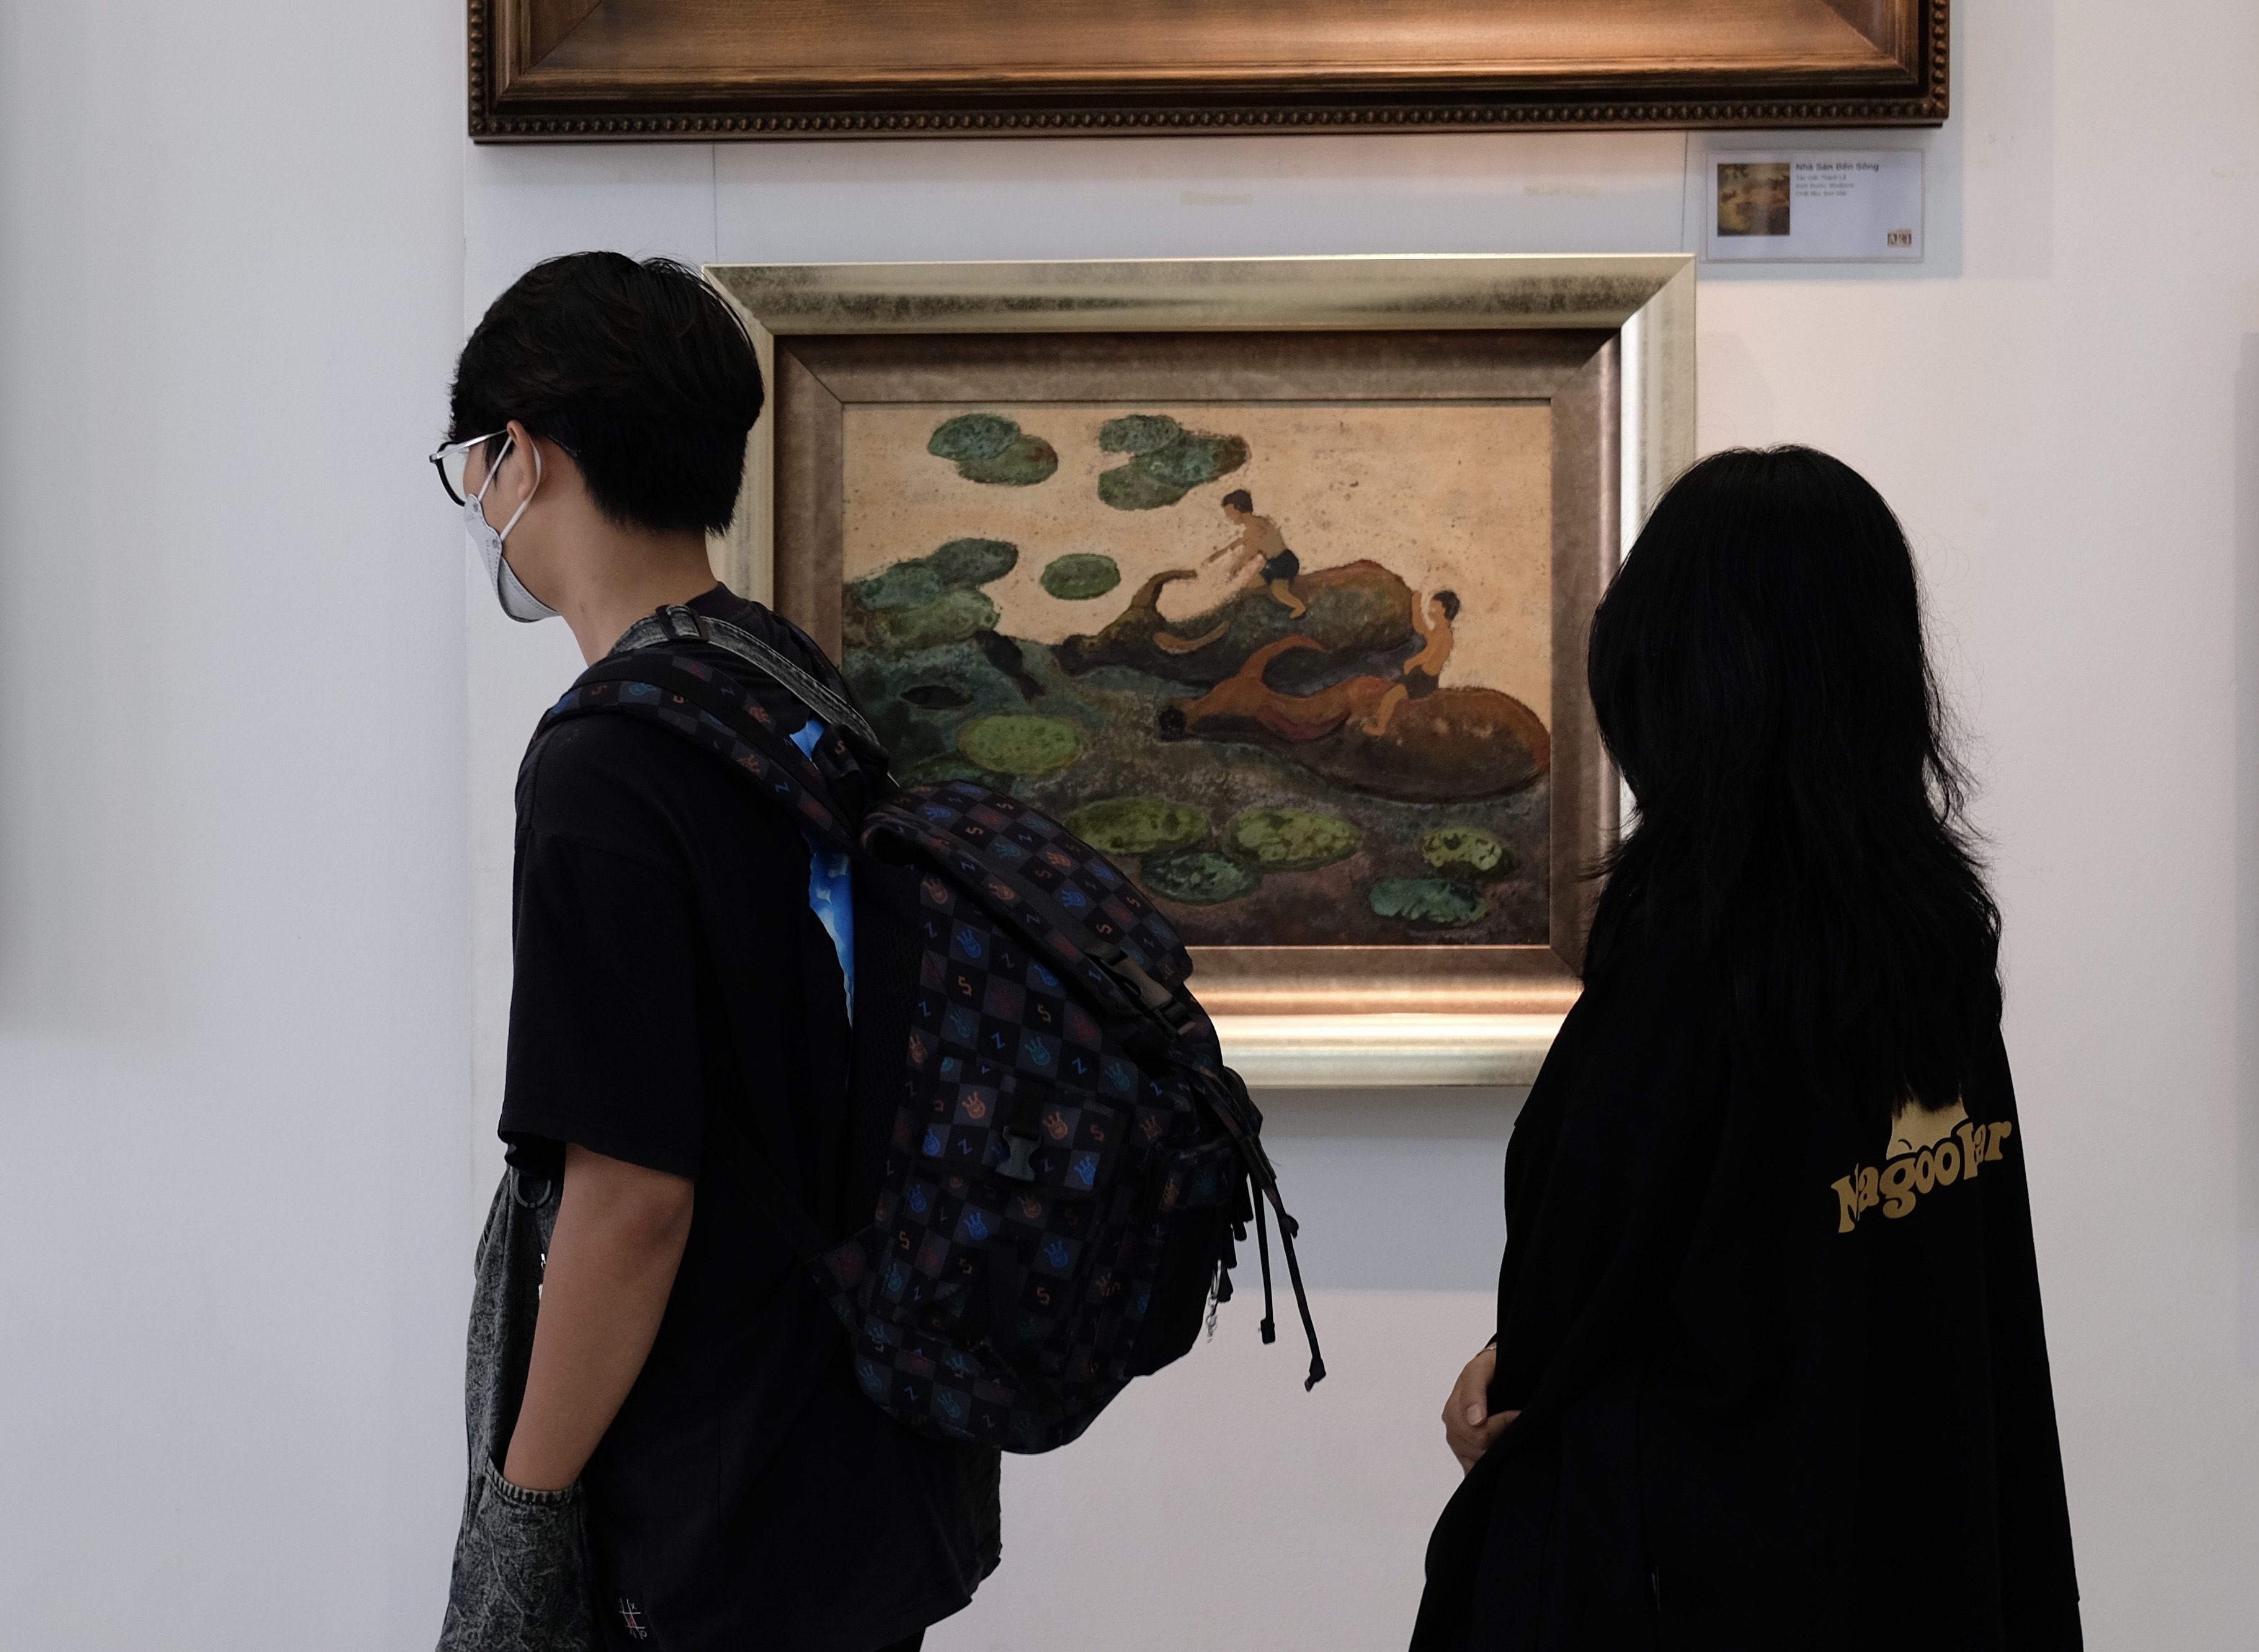 Visitors walk by a painting titled “Mua Len Trau” by Dang Manh Hung at the exhibition. Photo: Phuong Tran / Tuoi Tre News